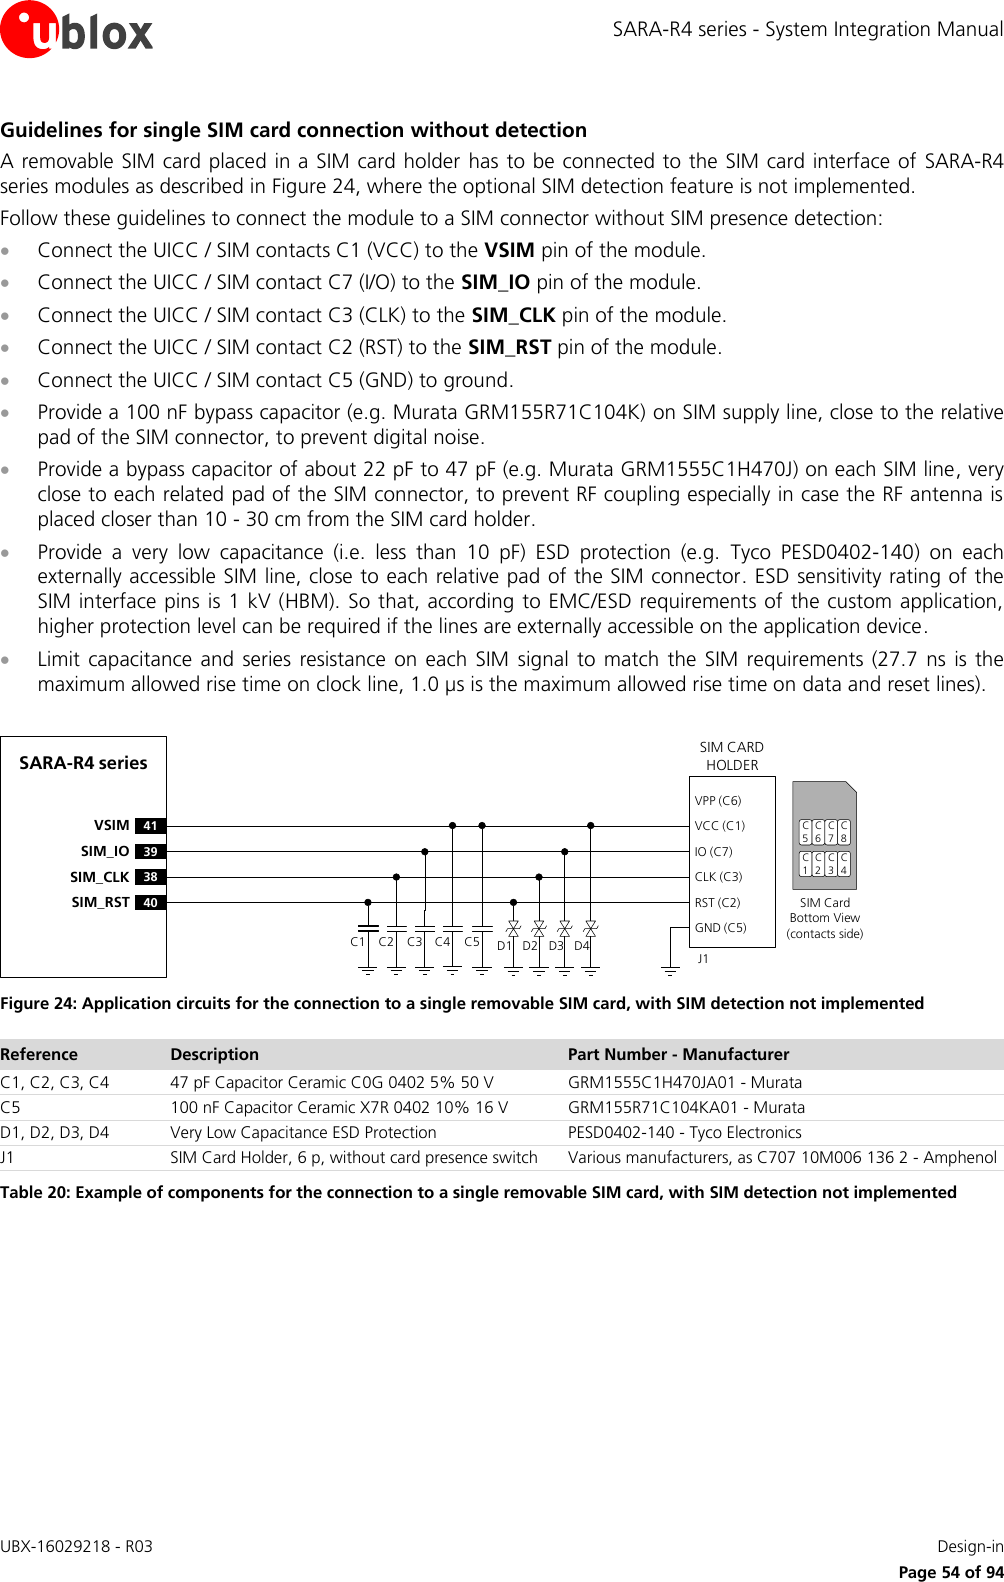 SARA-R4 series - System Integration Manual UBX-16029218 - R03    Design-in     Page 54 of 94 Guidelines for single SIM card connection without detection A removable SIM card placed in a SIM card holder  has  to be connected to the SIM card interface of SARA-R4 series modules as described in Figure 24, where the optional SIM detection feature is not implemented. Follow these guidelines to connect the module to a SIM connector without SIM presence detection:  Connect the UICC / SIM contacts C1 (VCC) to the VSIM pin of the module.  Connect the UICC / SIM contact C7 (I/O) to the SIM_IO pin of the module.  Connect the UICC / SIM contact C3 (CLK) to the SIM_CLK pin of the module.  Connect the UICC / SIM contact C2 (RST) to the SIM_RST pin of the module.  Connect the UICC / SIM contact C5 (GND) to ground.  Provide a 100 nF bypass capacitor (e.g. Murata GRM155R71C104K) on SIM supply line, close to the relative pad of the SIM connector, to prevent digital noise.  Provide a bypass capacitor of about 22 pF to 47 pF (e.g. Murata GRM1555C1H470J) on each SIM line, very close to each related pad of the SIM connector, to prevent RF coupling especially in case the RF antenna is placed closer than 10 - 30 cm from the SIM card holder.  Provide  a  very  low  capacitance  (i.e.  less  than  10  pF)  ESD  protection  (e.g.  Tyco  PESD0402-140)  on  each externally accessible SIM line, close to each relative pad of the SIM connector. ESD sensitivity rating of the SIM interface pins is 1 kV (HBM). So that, according to EMC/ESD requirements of the custom application, higher protection level can be required if the lines are externally accessible on the application device.  Limit capacitance  and  series resistance  on each  SIM  signal  to  match the  SIM requirements (27.7  ns is the maximum allowed rise time on clock line, 1.0 µs is the maximum allowed rise time on data and reset lines).  SARA-R4 series41VSIM39SIM_IO38SIM_CLK40SIM_RSTSIM CARD HOLDERC5C6C7C1C2C3SIM Card Bottom View (contacts side)C1VPP (C6)VCC (C1)IO (C7)CLK (C3)RST (C2)GND (C5)C2 C3 C5J1C4 D1 D2 D3 D4C8C4 Figure 24: Application circuits for the connection to a single removable SIM card, with SIM detection not implemented Reference Description Part Number - Manufacturer C1, C2, C3, C4 47 pF Capacitor Ceramic C0G 0402 5% 50 V GRM1555C1H470JA01 - Murata C5 100 nF Capacitor Ceramic X7R 0402 10% 16 V GRM155R71C104KA01 - Murata D1, D2, D3, D4 Very Low Capacitance ESD Protection PESD0402-140 - Tyco Electronics  J1 SIM Card Holder, 6 p, without card presence switch Various manufacturers, as C707 10M006 136 2 - Amphenol Table 20: Example of components for the connection to a single removable SIM card, with SIM detection not implemented  